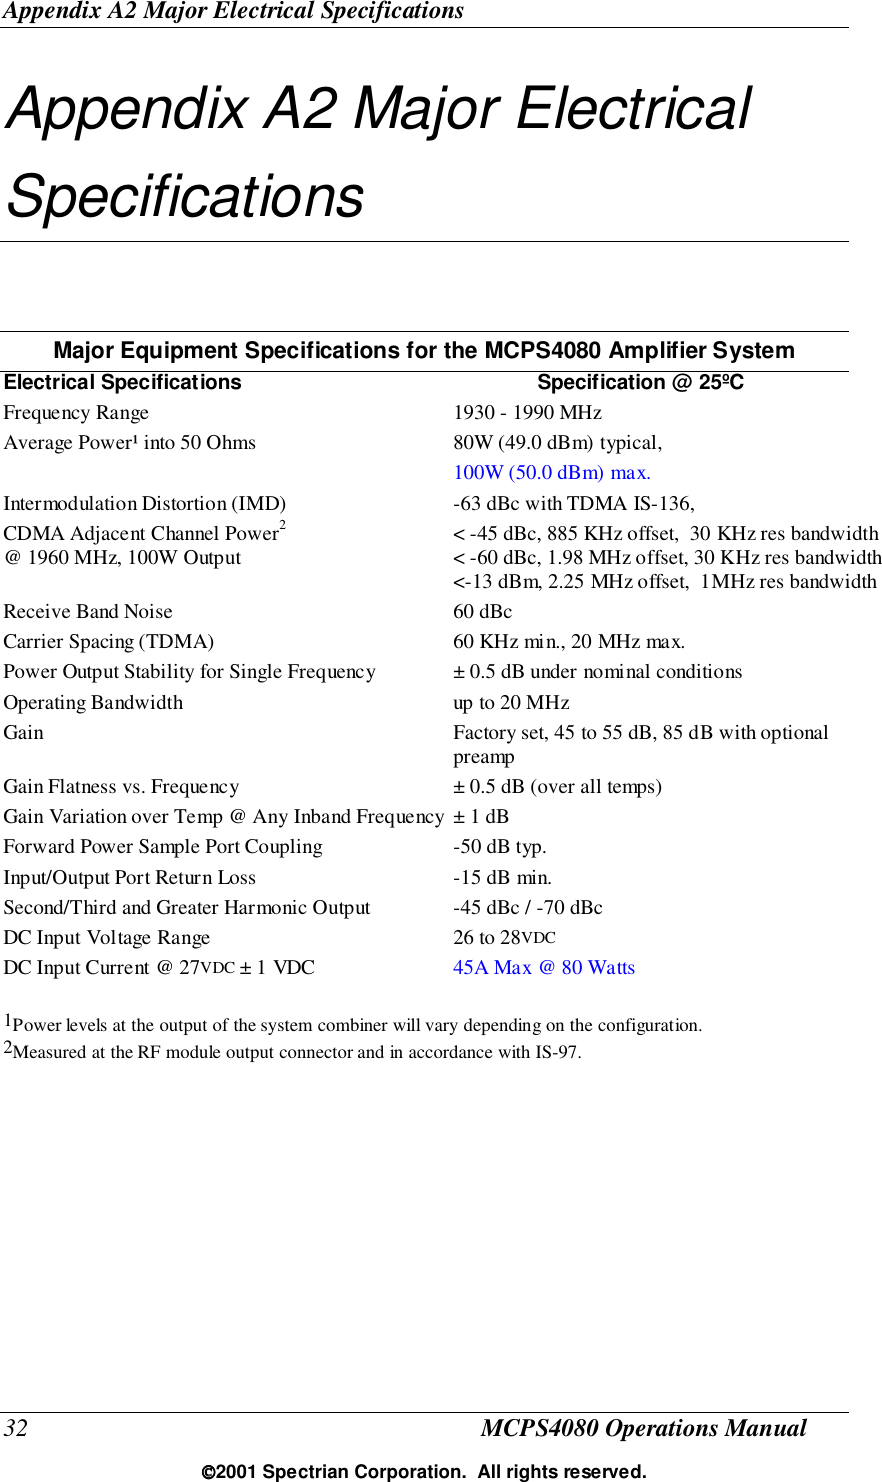 Appendix A2 Major Electrical Specifications32 MCPS4080 Operations Manual2001 Spectrian Corporation.  All rights reserved.Appendix A2 Major ElectricalSpecificationsMajor Equipment Specifications for the MCPS4080 Amplifier SystemElectrical Specifications Specification @ 25ºCFrequency Range 1930 - 1990 MHzAverage Power¹ into 50 Ohms 80W (49.0 dBm) typical,100W (50.0 dBm) max.Intermodulation Distortion (IMD) -63 dBc with TDMA IS-136,CDMA Adjacent Channel Power2&lt; -45 dBc, 885 KHz offset,  30 KHz res bandwidth@ 1960 MHz, 100W Output &lt; -60 dBc, 1.98 MHz offset, 30 KHz res bandwidth&lt;-13 dBm, 2.25 MHz offset,  1MHz res bandwidthReceive Band Noise 60 dBcCarrier Spacing (TDMA) 60 KHz min., 20 MHz max.Power Output Stability for Single Frequency ± 0.5 dB under nominal conditionsOperating Bandwidth up to 20 MHzGain Factory set, 45 to 55 dB, 85 dB with optionalpreampGain Flatness vs. Frequency ± 0.5 dB (over all temps)Gain Variation over Temp @ Any Inband Frequency ± 1 dBForward Power Sample Port Coupling -50 dB typ.Input/Output Port Return Loss -15 dB min.Second/Third and Greater Harmonic Output -45 dBc / -70 dBcDC Input Voltage Range 26 to 28VDCDC Input Current @ 27VDC ± 1 VDC 45A Max @ 80 Watts1Power levels at the output of the system combiner will vary depending on the configuration.2Measured at the RF module output connector and in accordance with IS-97.